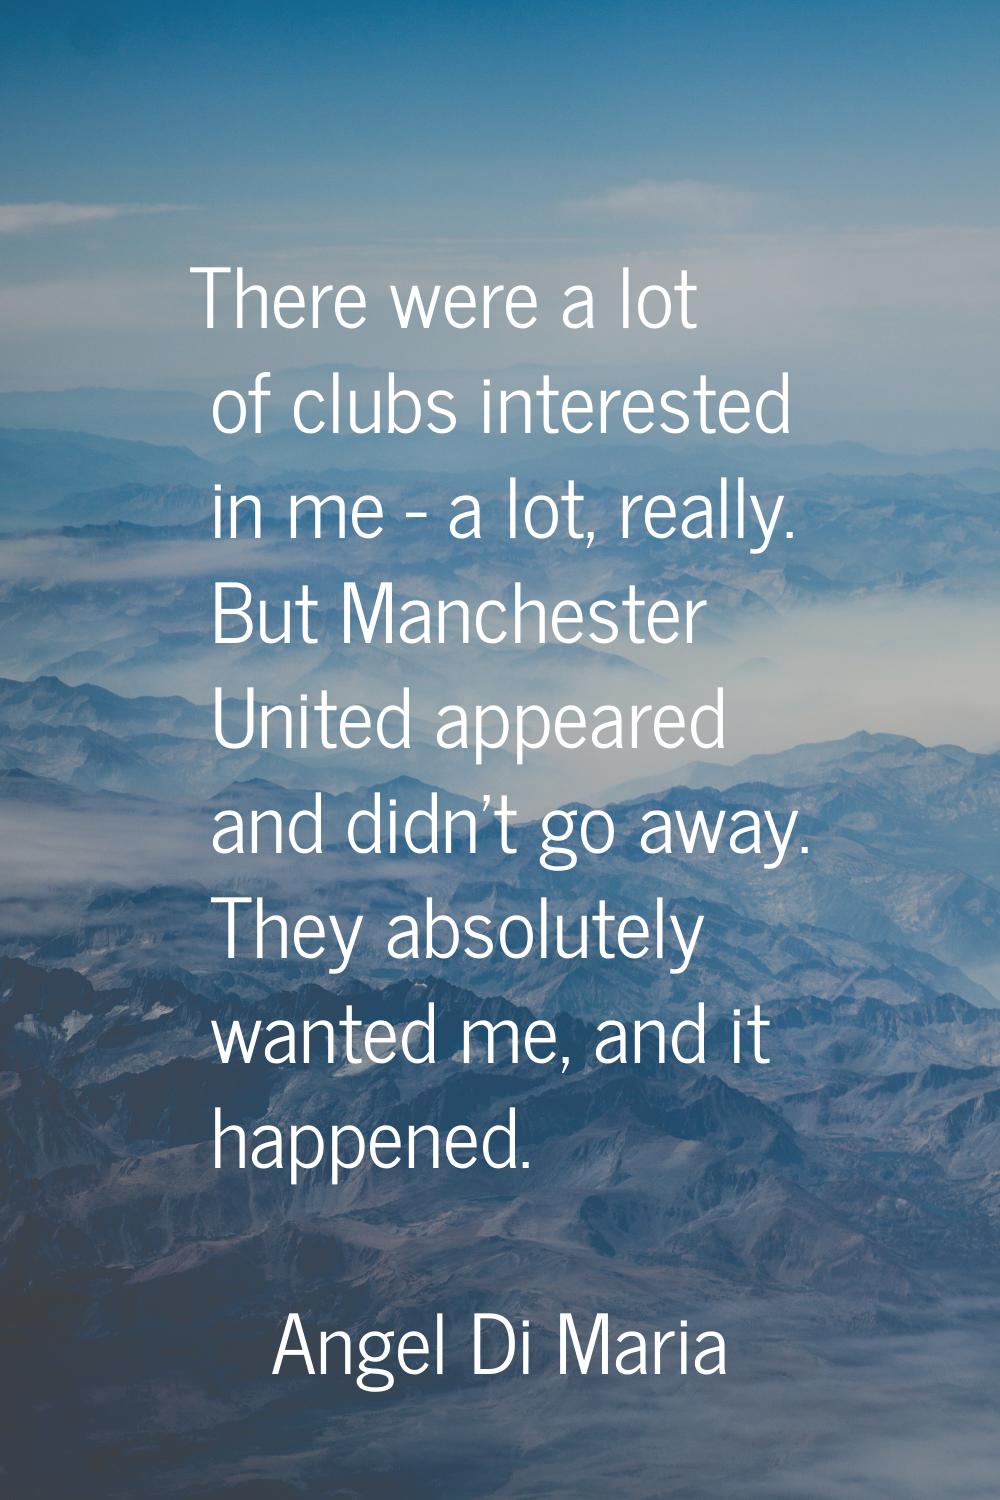 There were a lot of clubs interested in me - a lot, really. But Manchester United appeared and didn